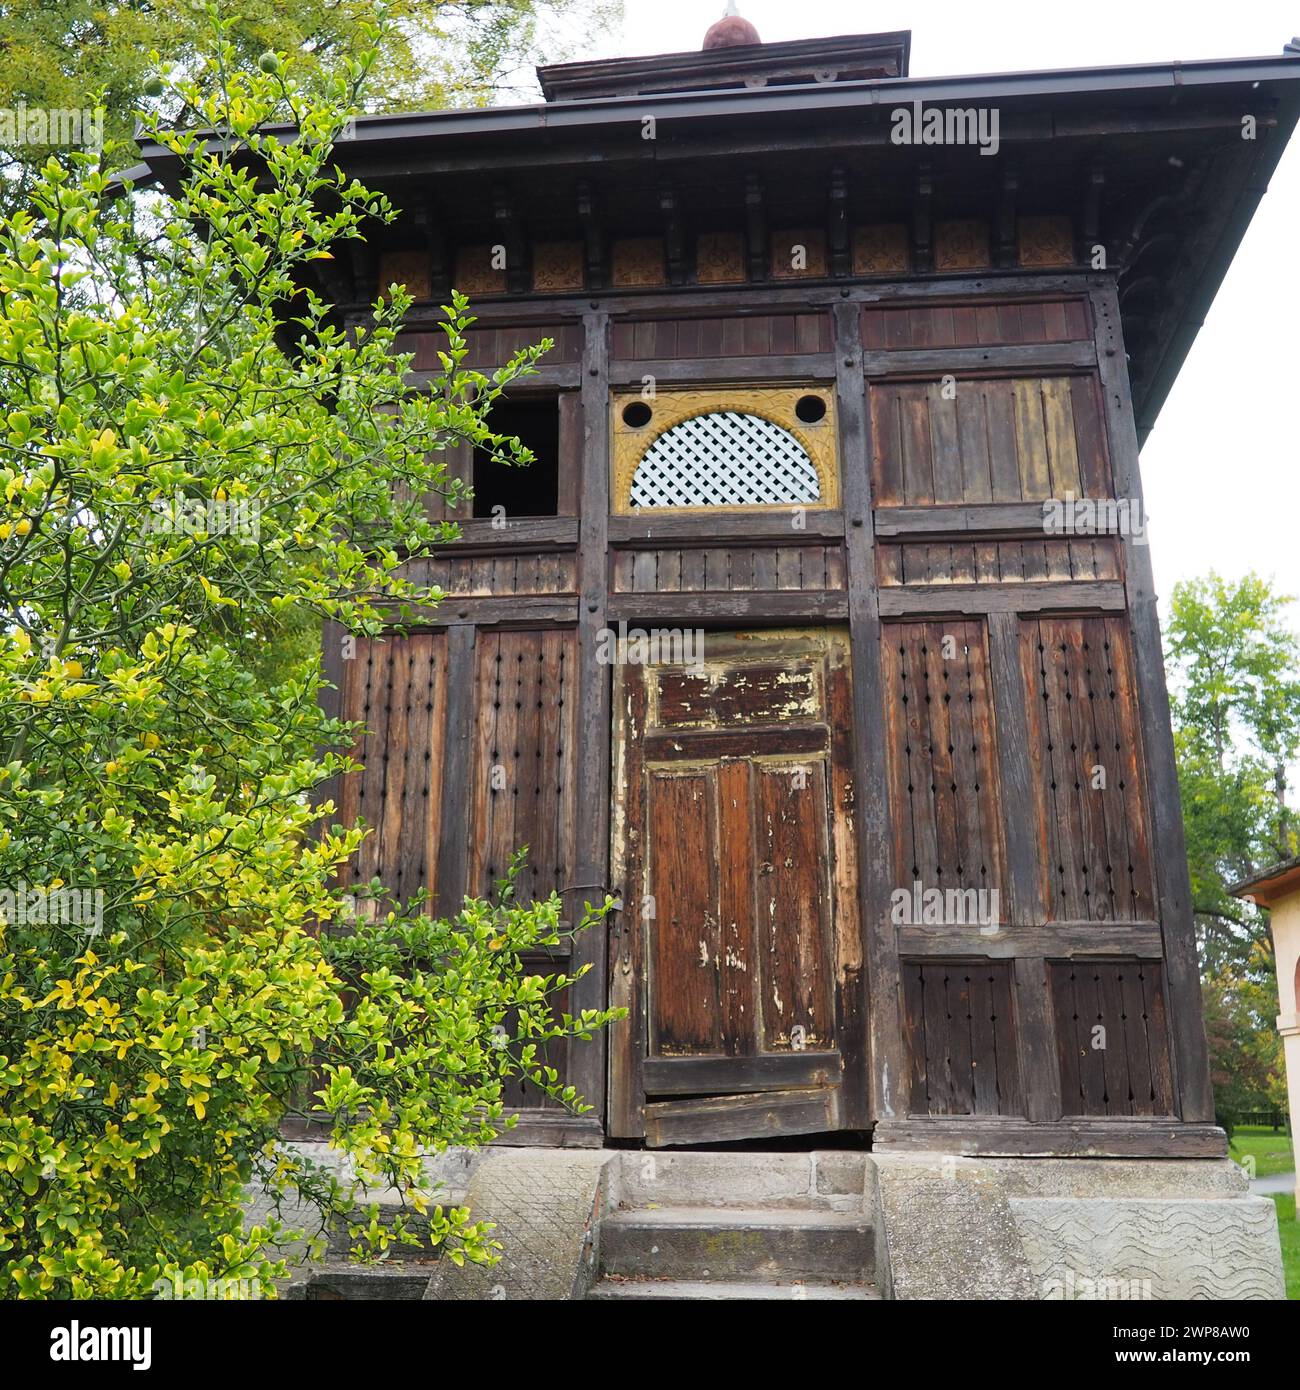 Banja Koviljaca, Serbia, Guchevo, Loznica, September 30, 2022. Rehabilitation center with sulfur and iron mineral waters. An old wooden house above a Stock Photo